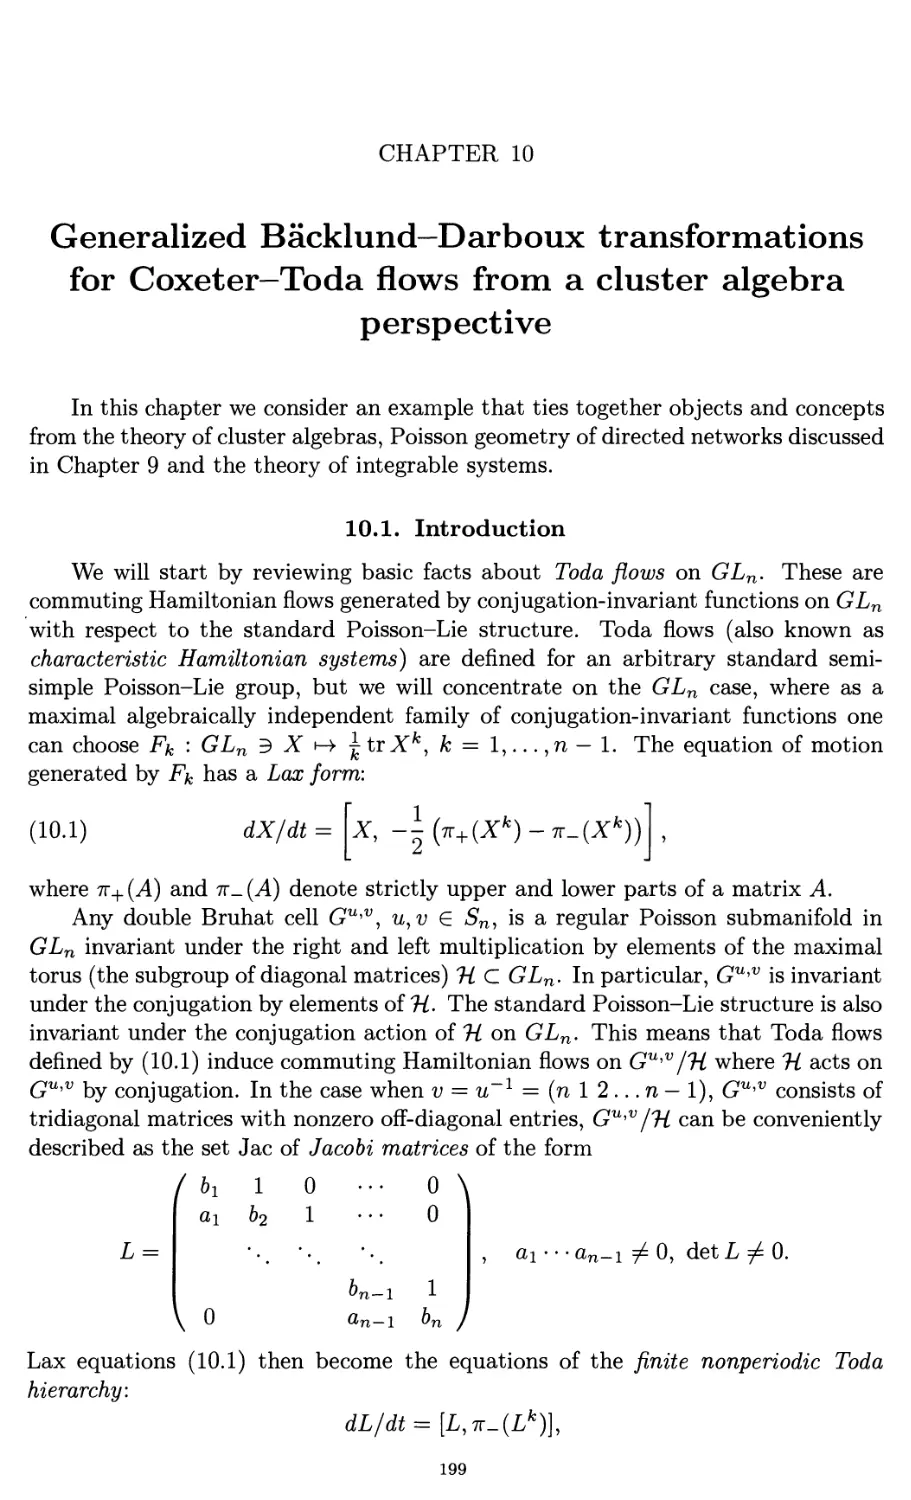 Chapter 10. Generalized Backlund-Darboux transformations for Coxeter- Toda flows from a cluster algebra perspective 213